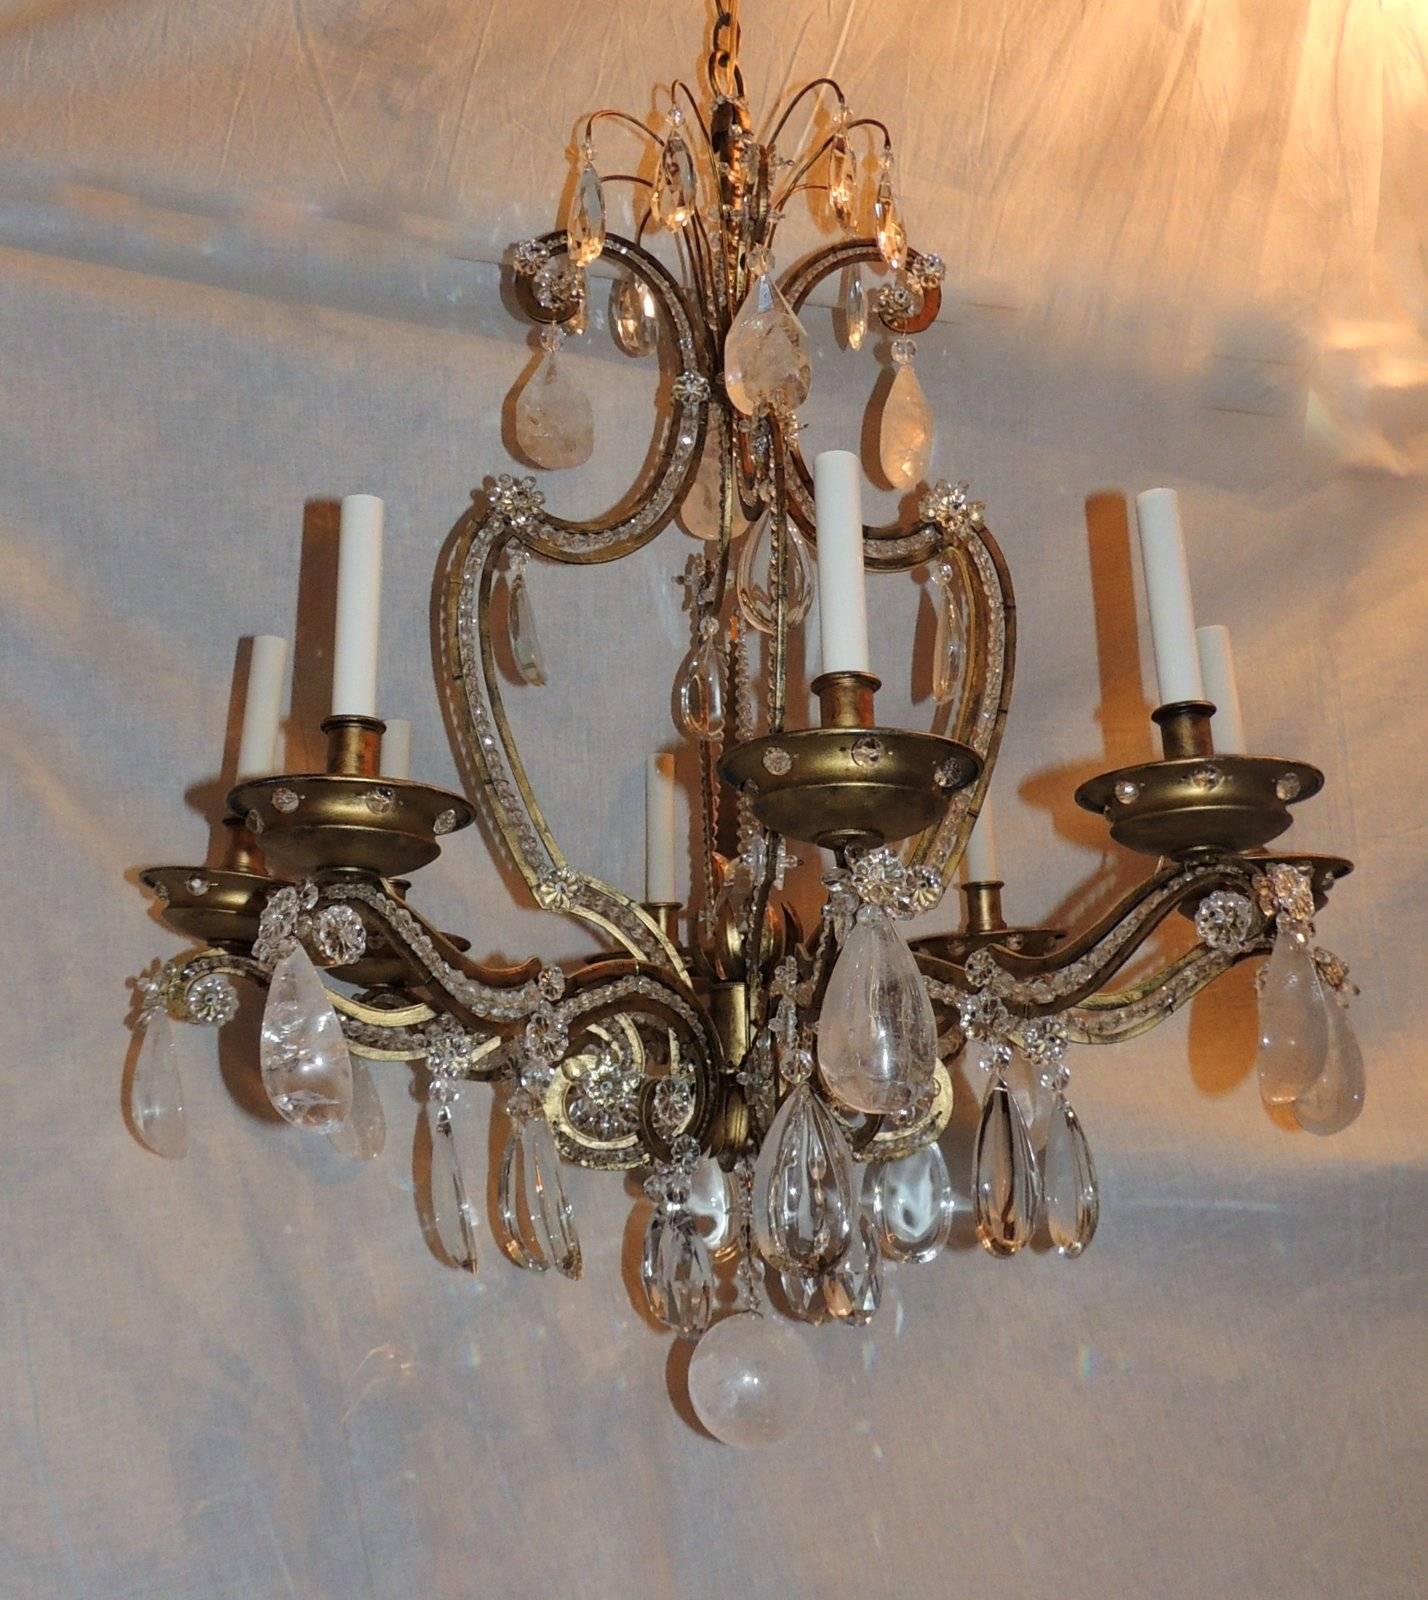 This beautiful eight-arm chandelier has the cage rimmed with crystal beads inset, rock crystal prisms at the crown and the scrolled arms, with a crystal mix at the bottom finished with a large rock crystal ball. In the center is a beautiful large